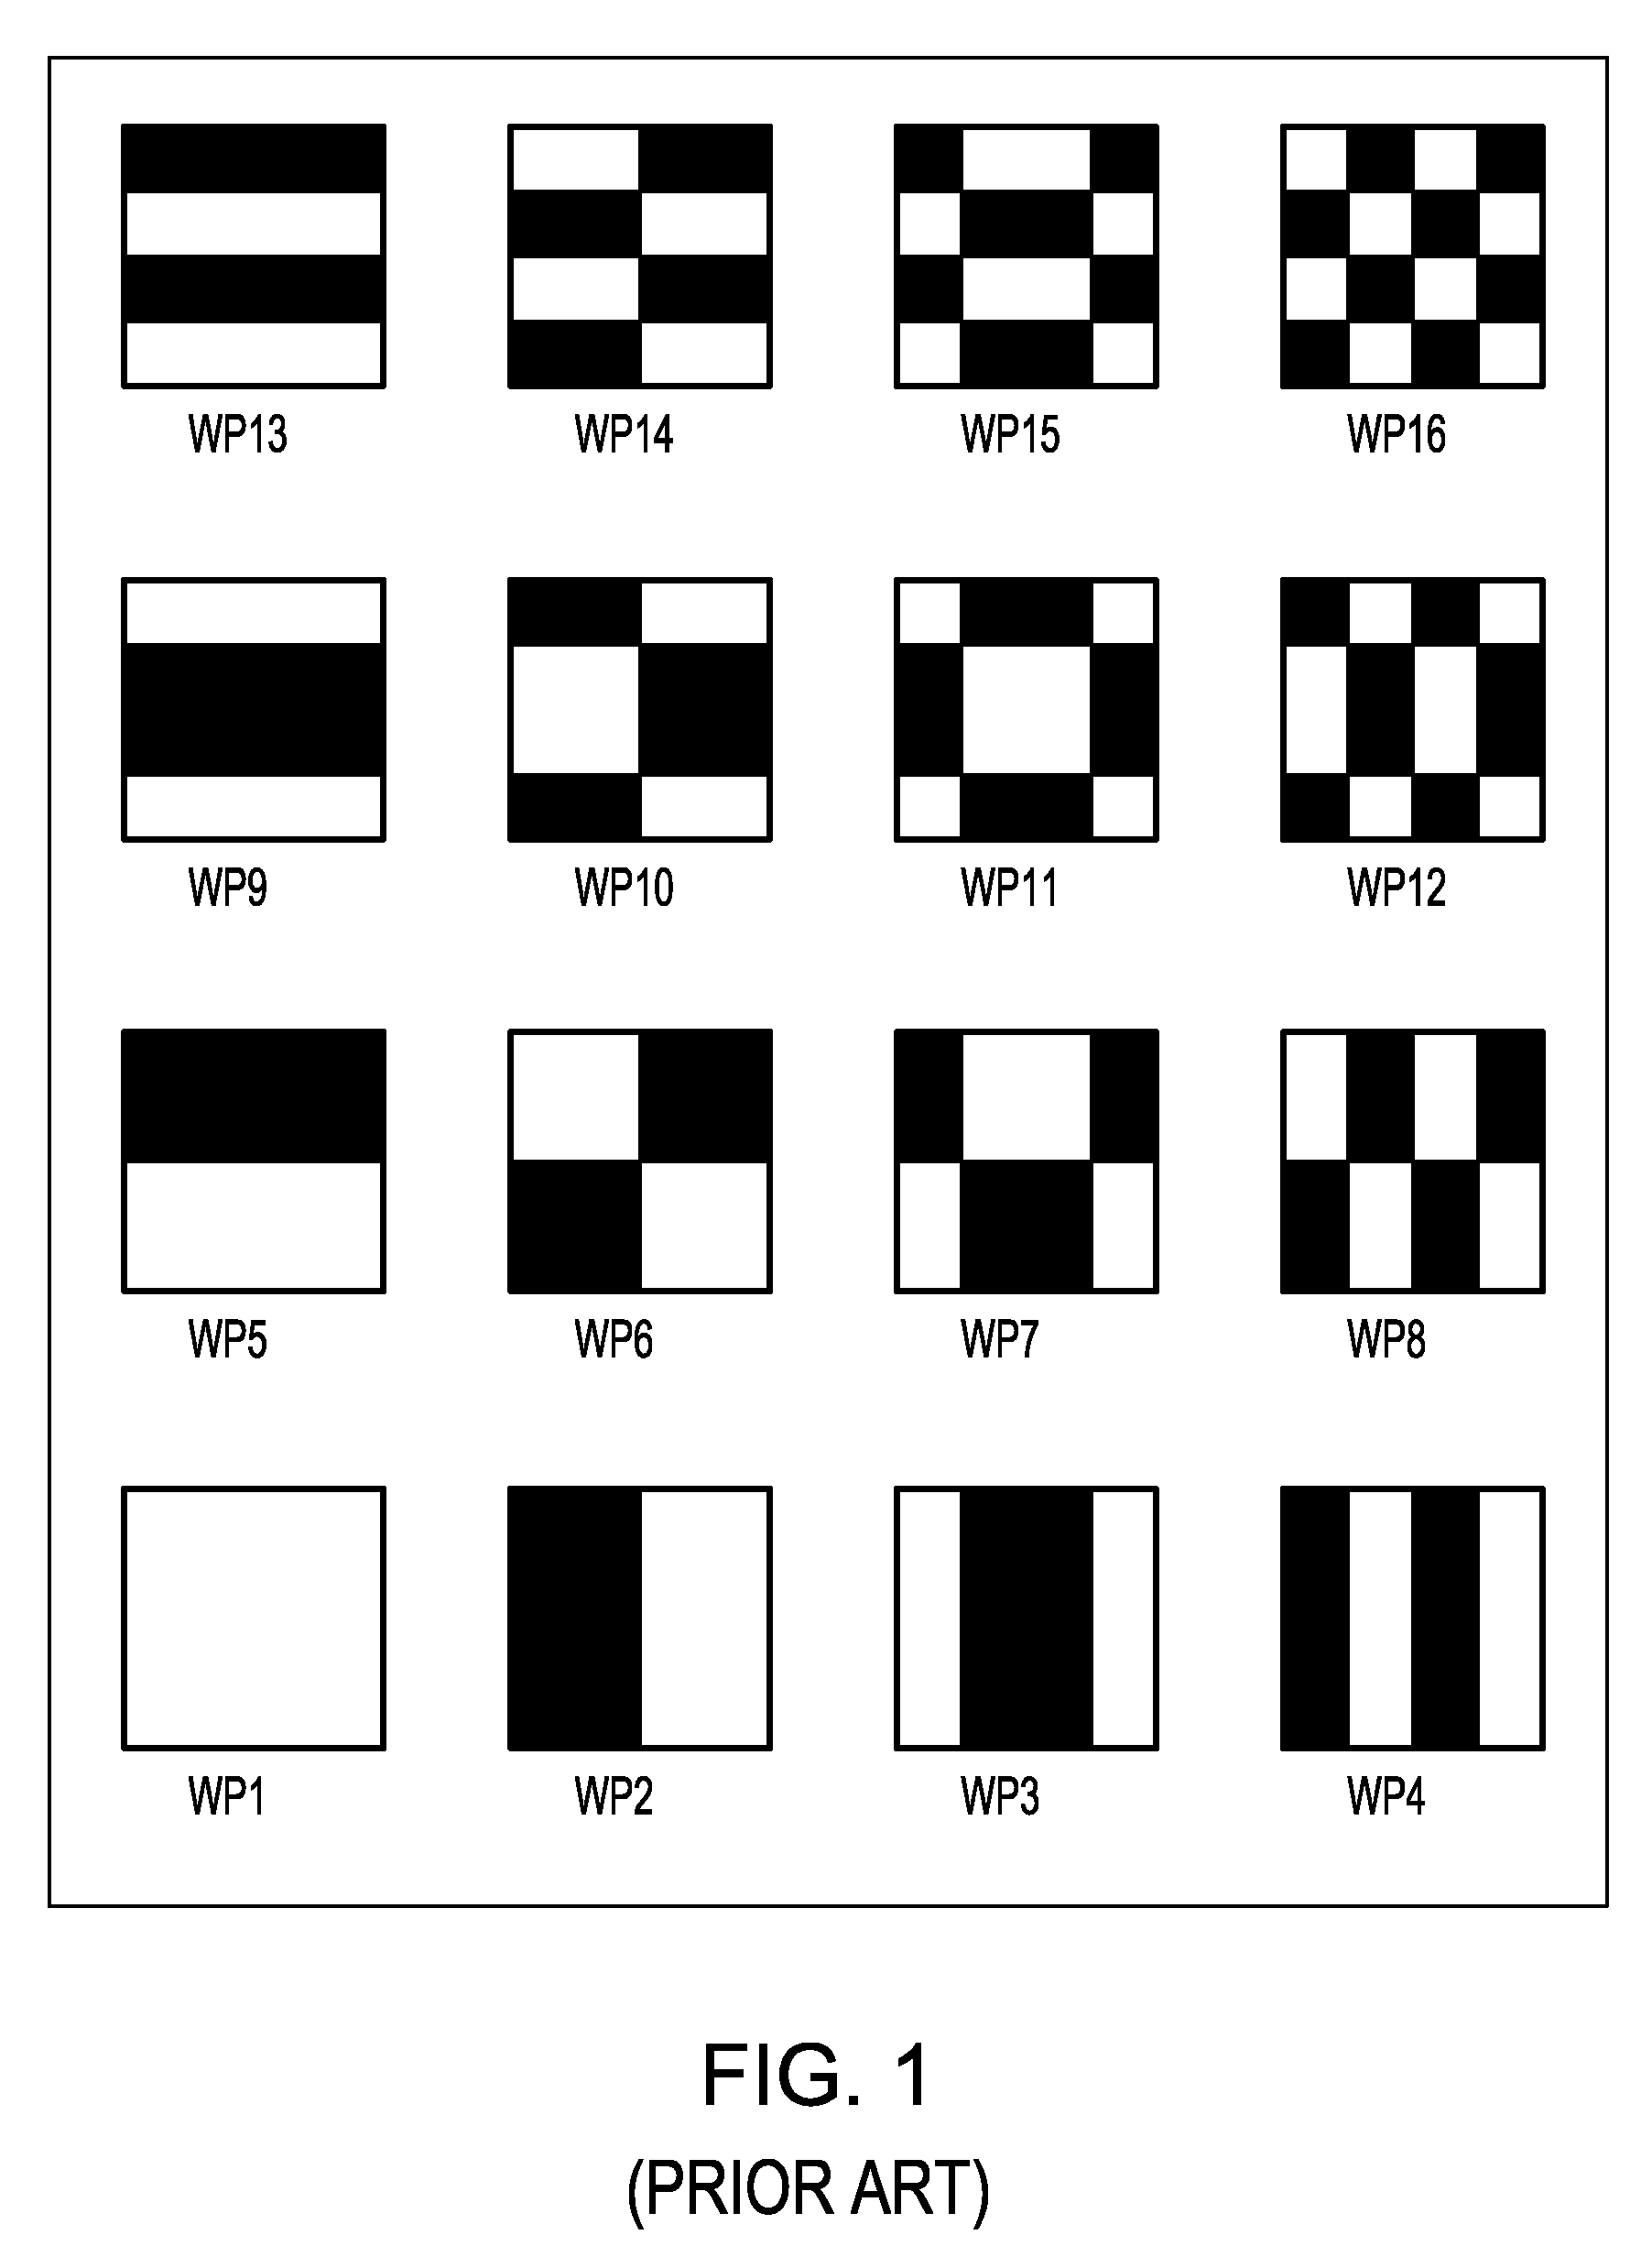 Pattern matching system for layout shapes using walsh patterns